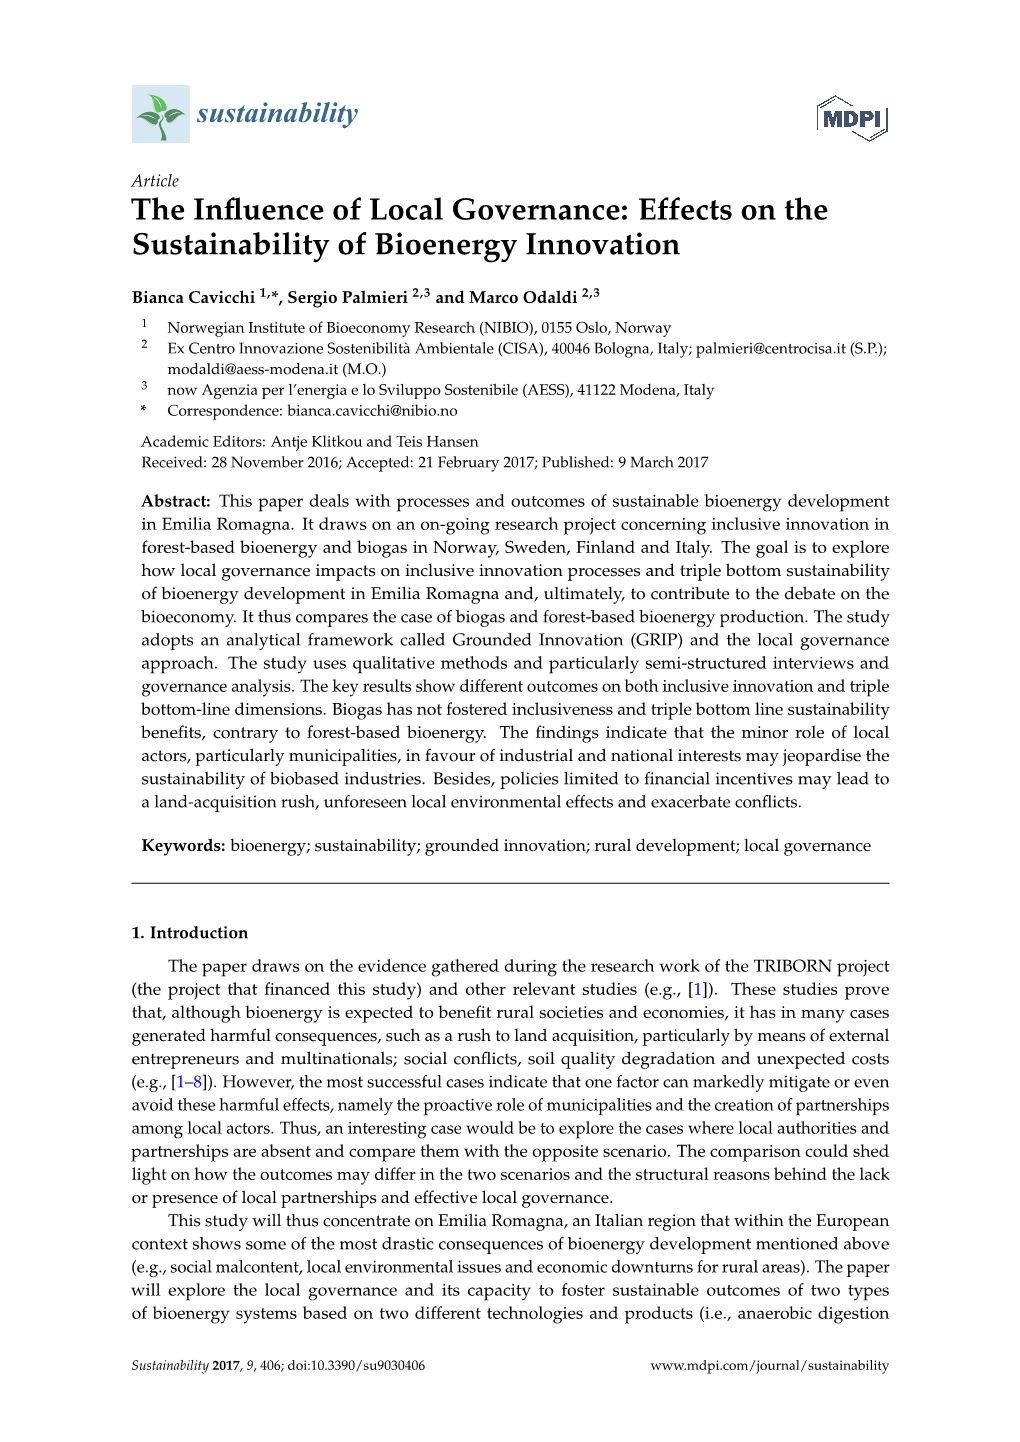 The Influence of Local Governance: Effects on the Sustainability of Bioenergy Innovation